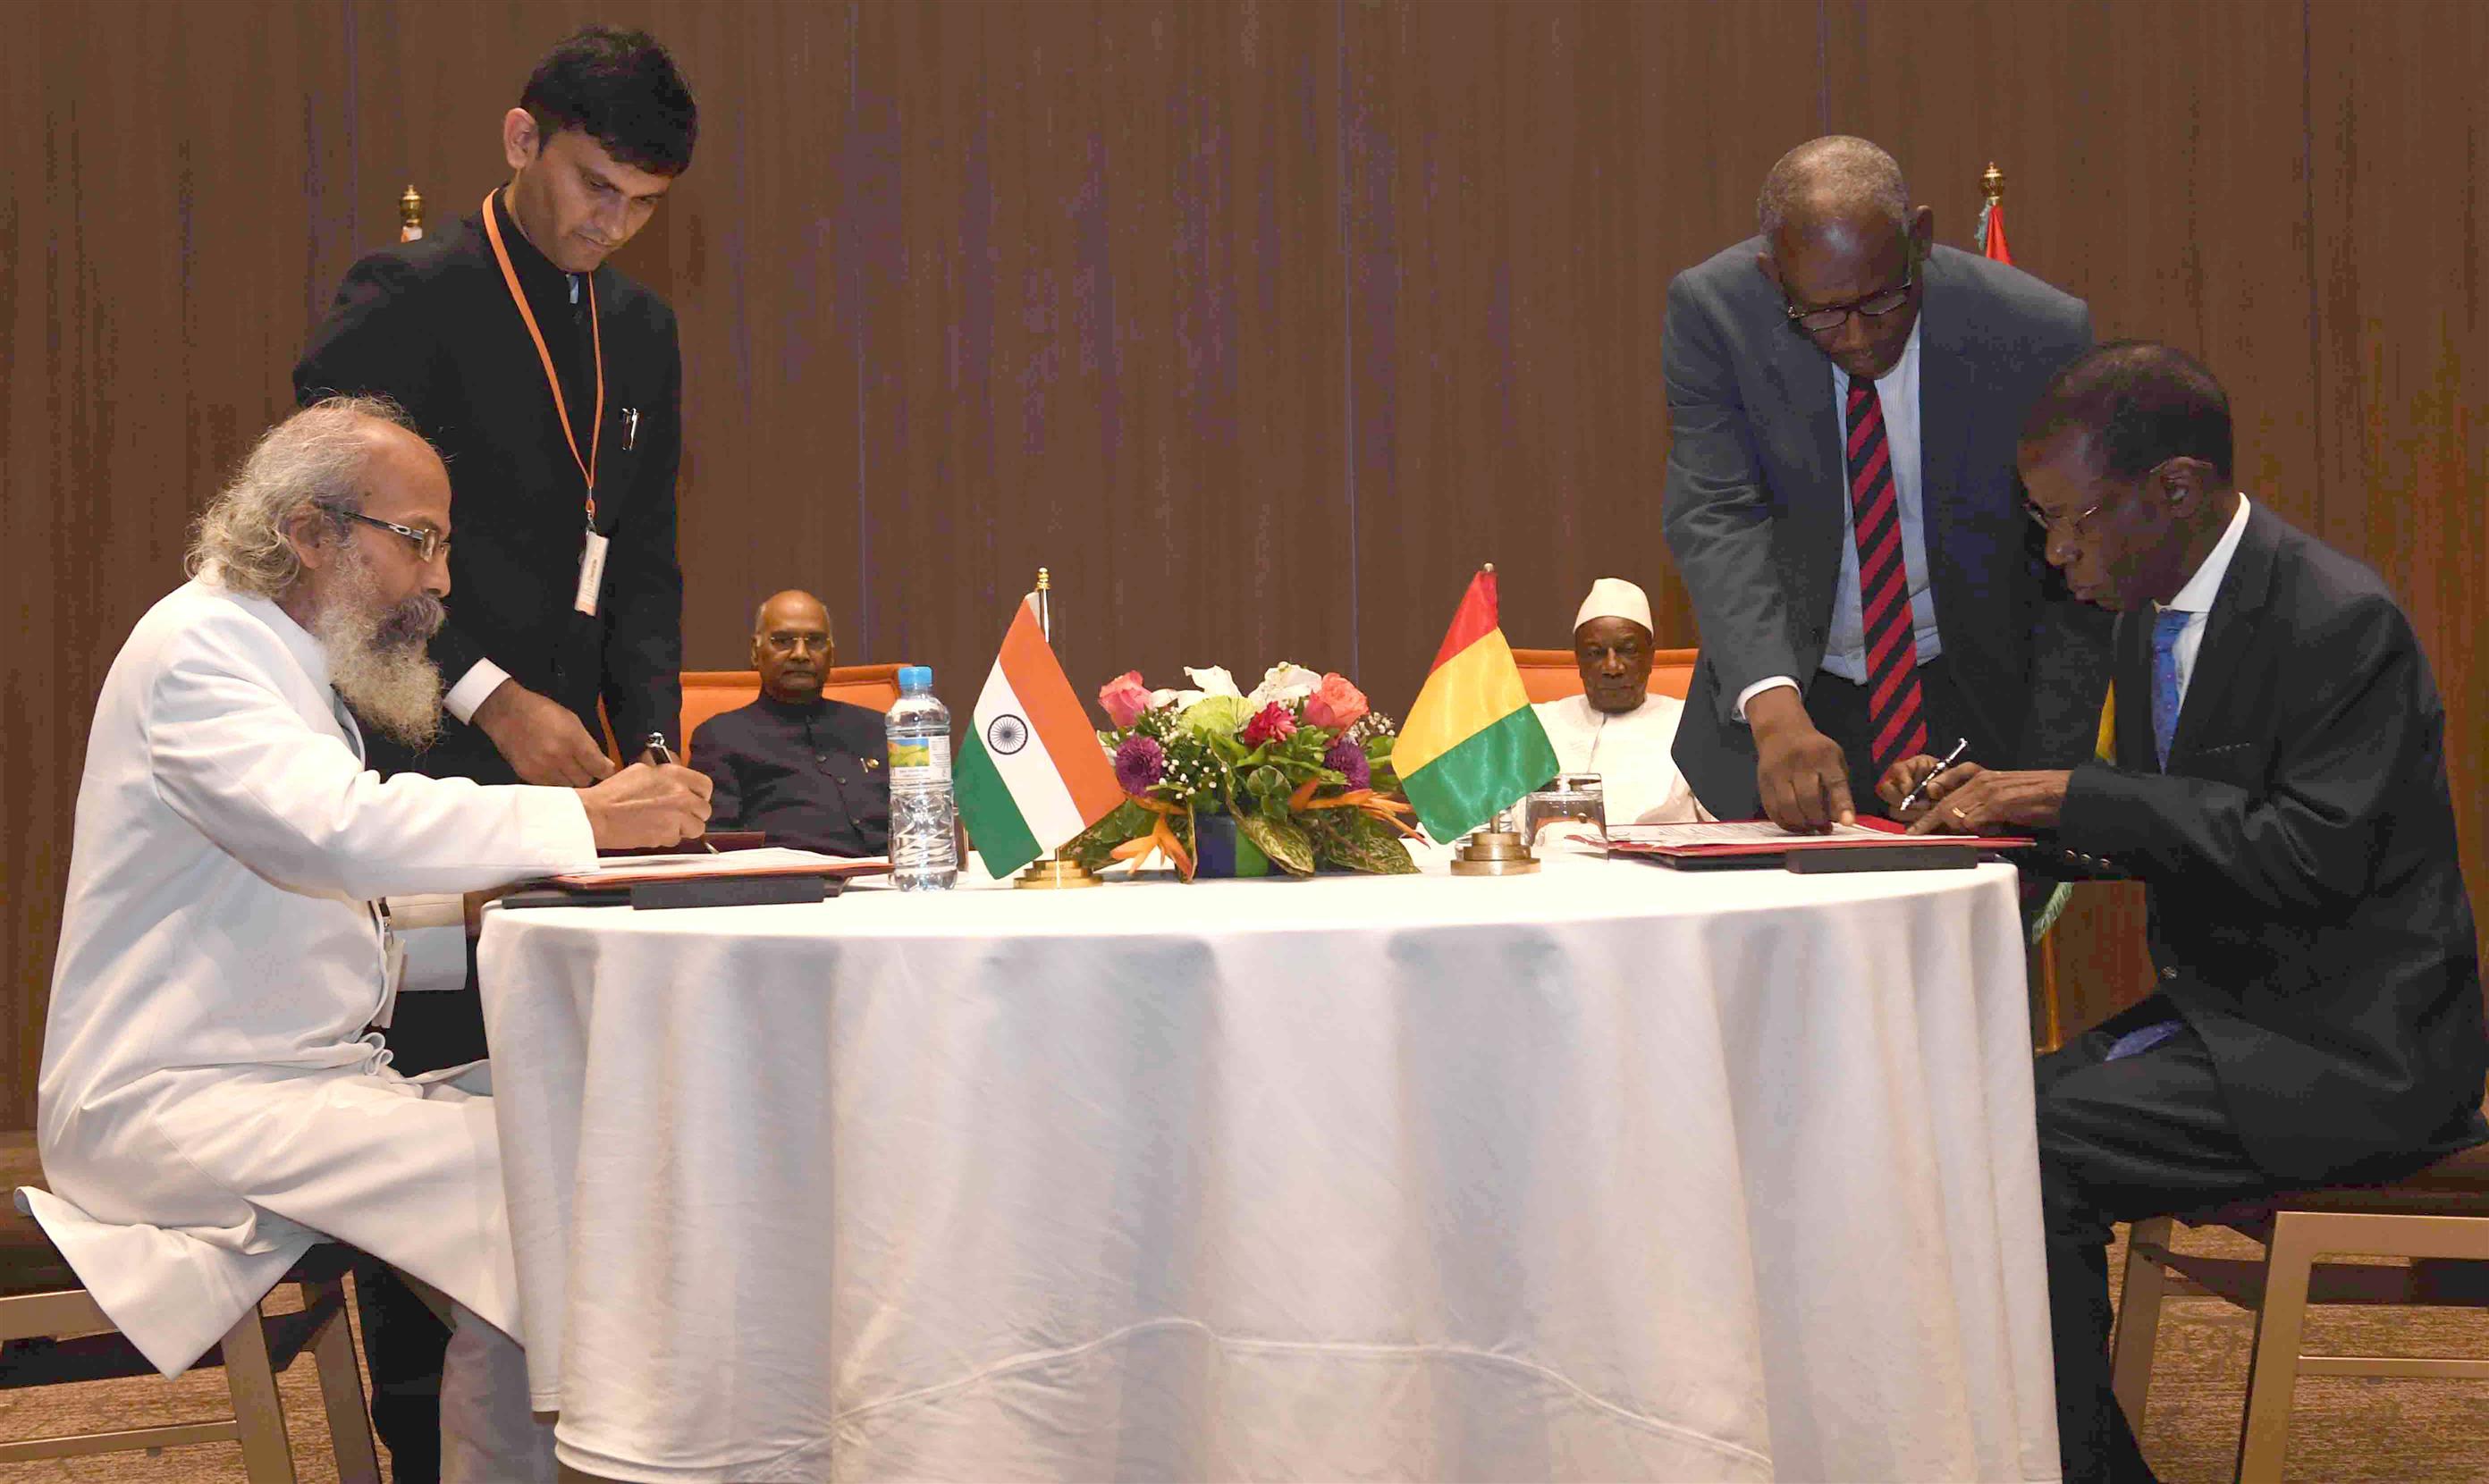 The President, Shri Ram Nath Kovind and the President of the Republic of Guinea, Mr. Alpha Conde witnessing the signing of the bilateral agreements, in Conakry, Republic of Guinea on August 02, 2019.